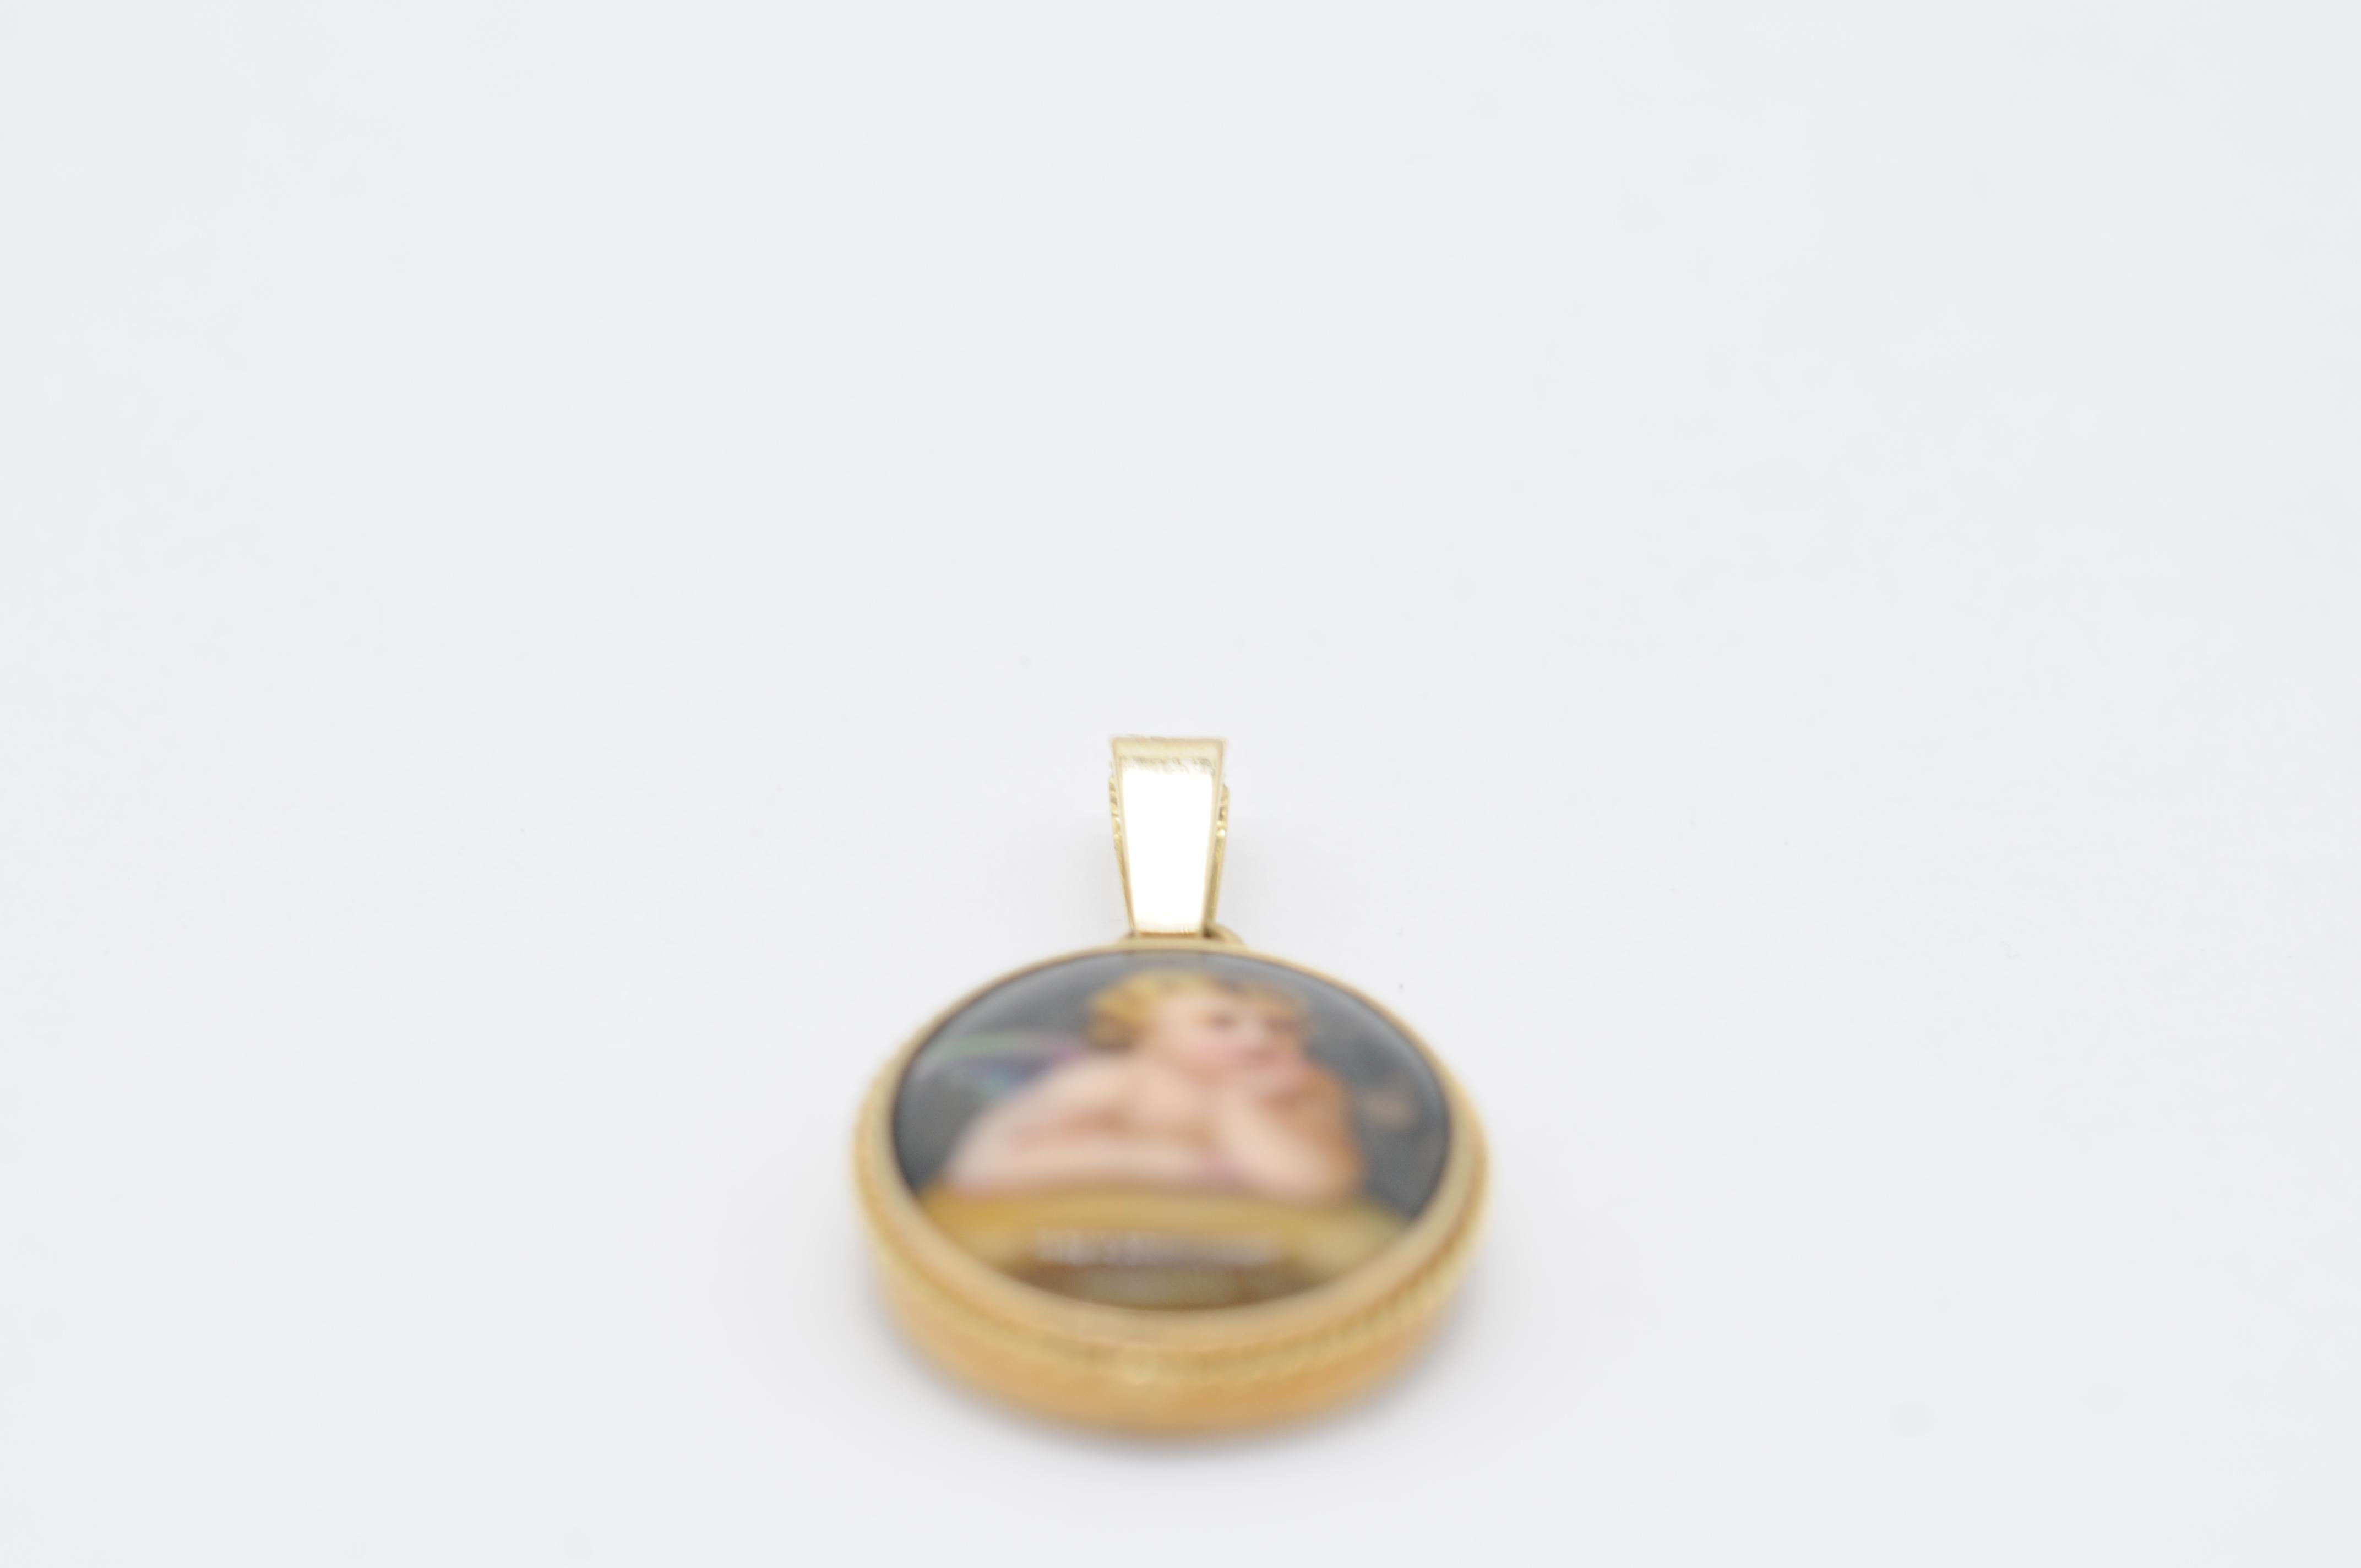 majestic pendant made of 14k yellow gold porcelain For Sale 2